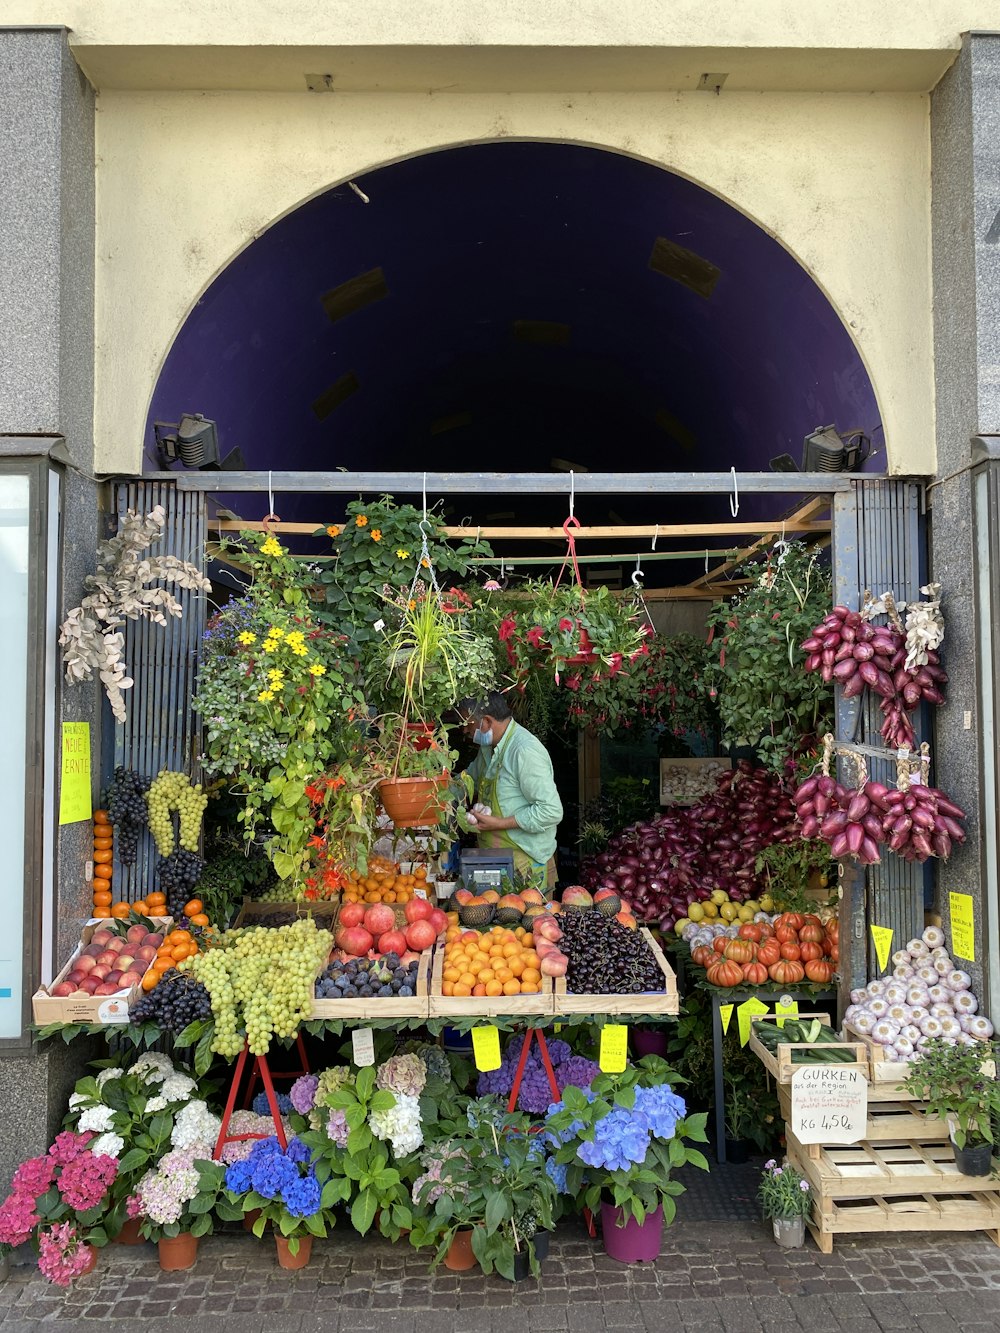 a person selling fruits at a market